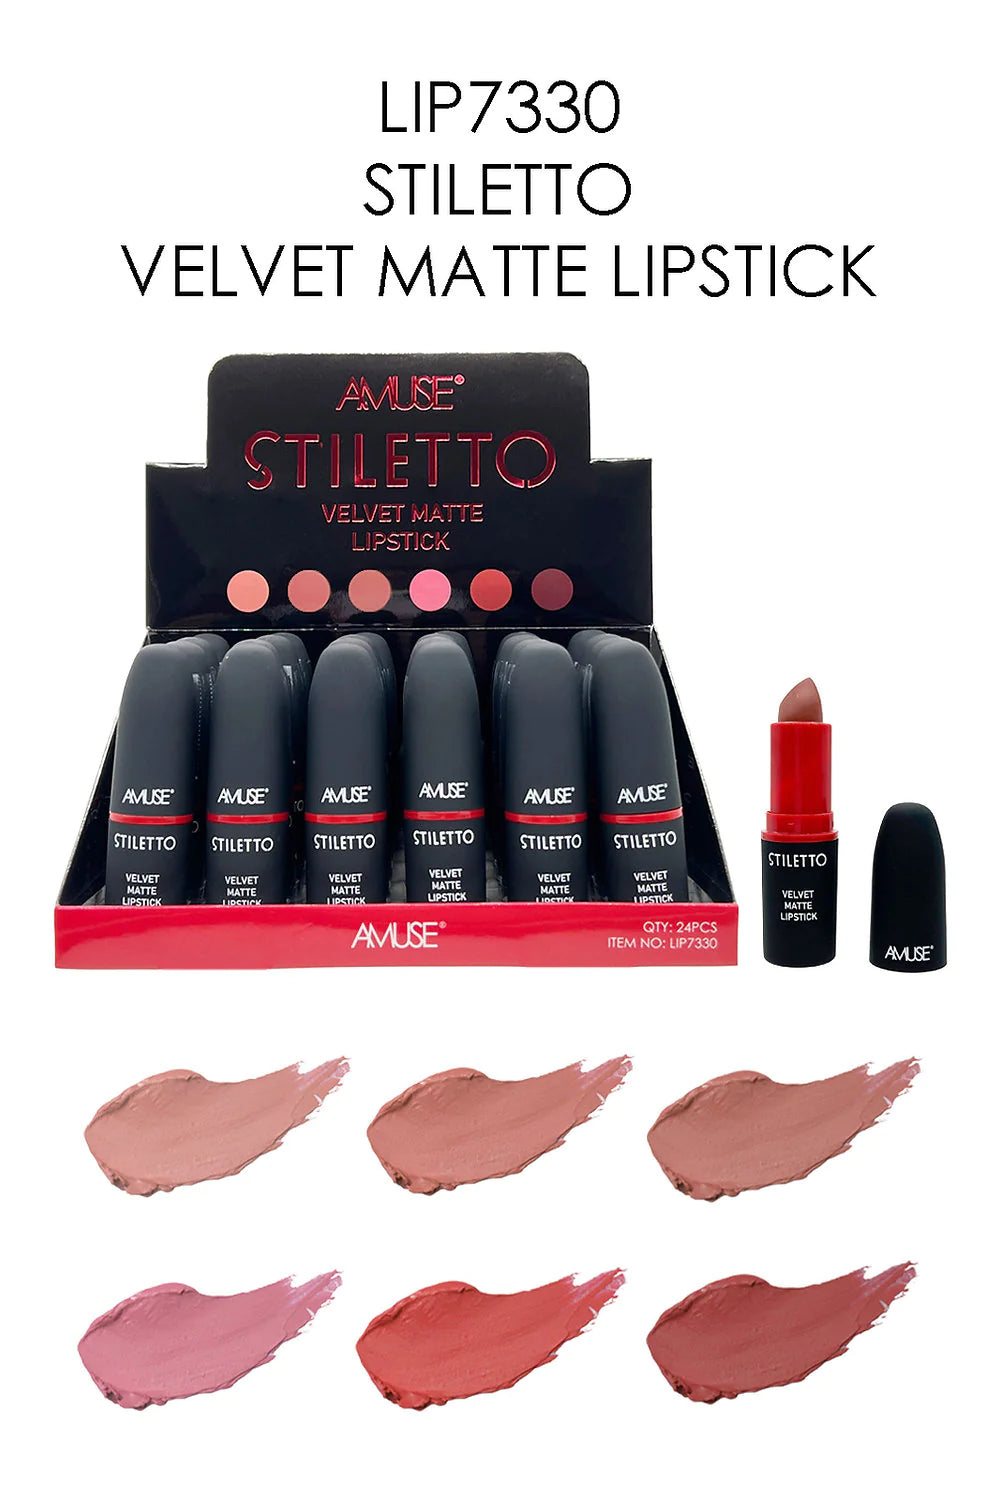 Beautiful and sexy colors  Matte Finish  Long Lasting. The best price, deal and quality w/ Bonitawholesale.com